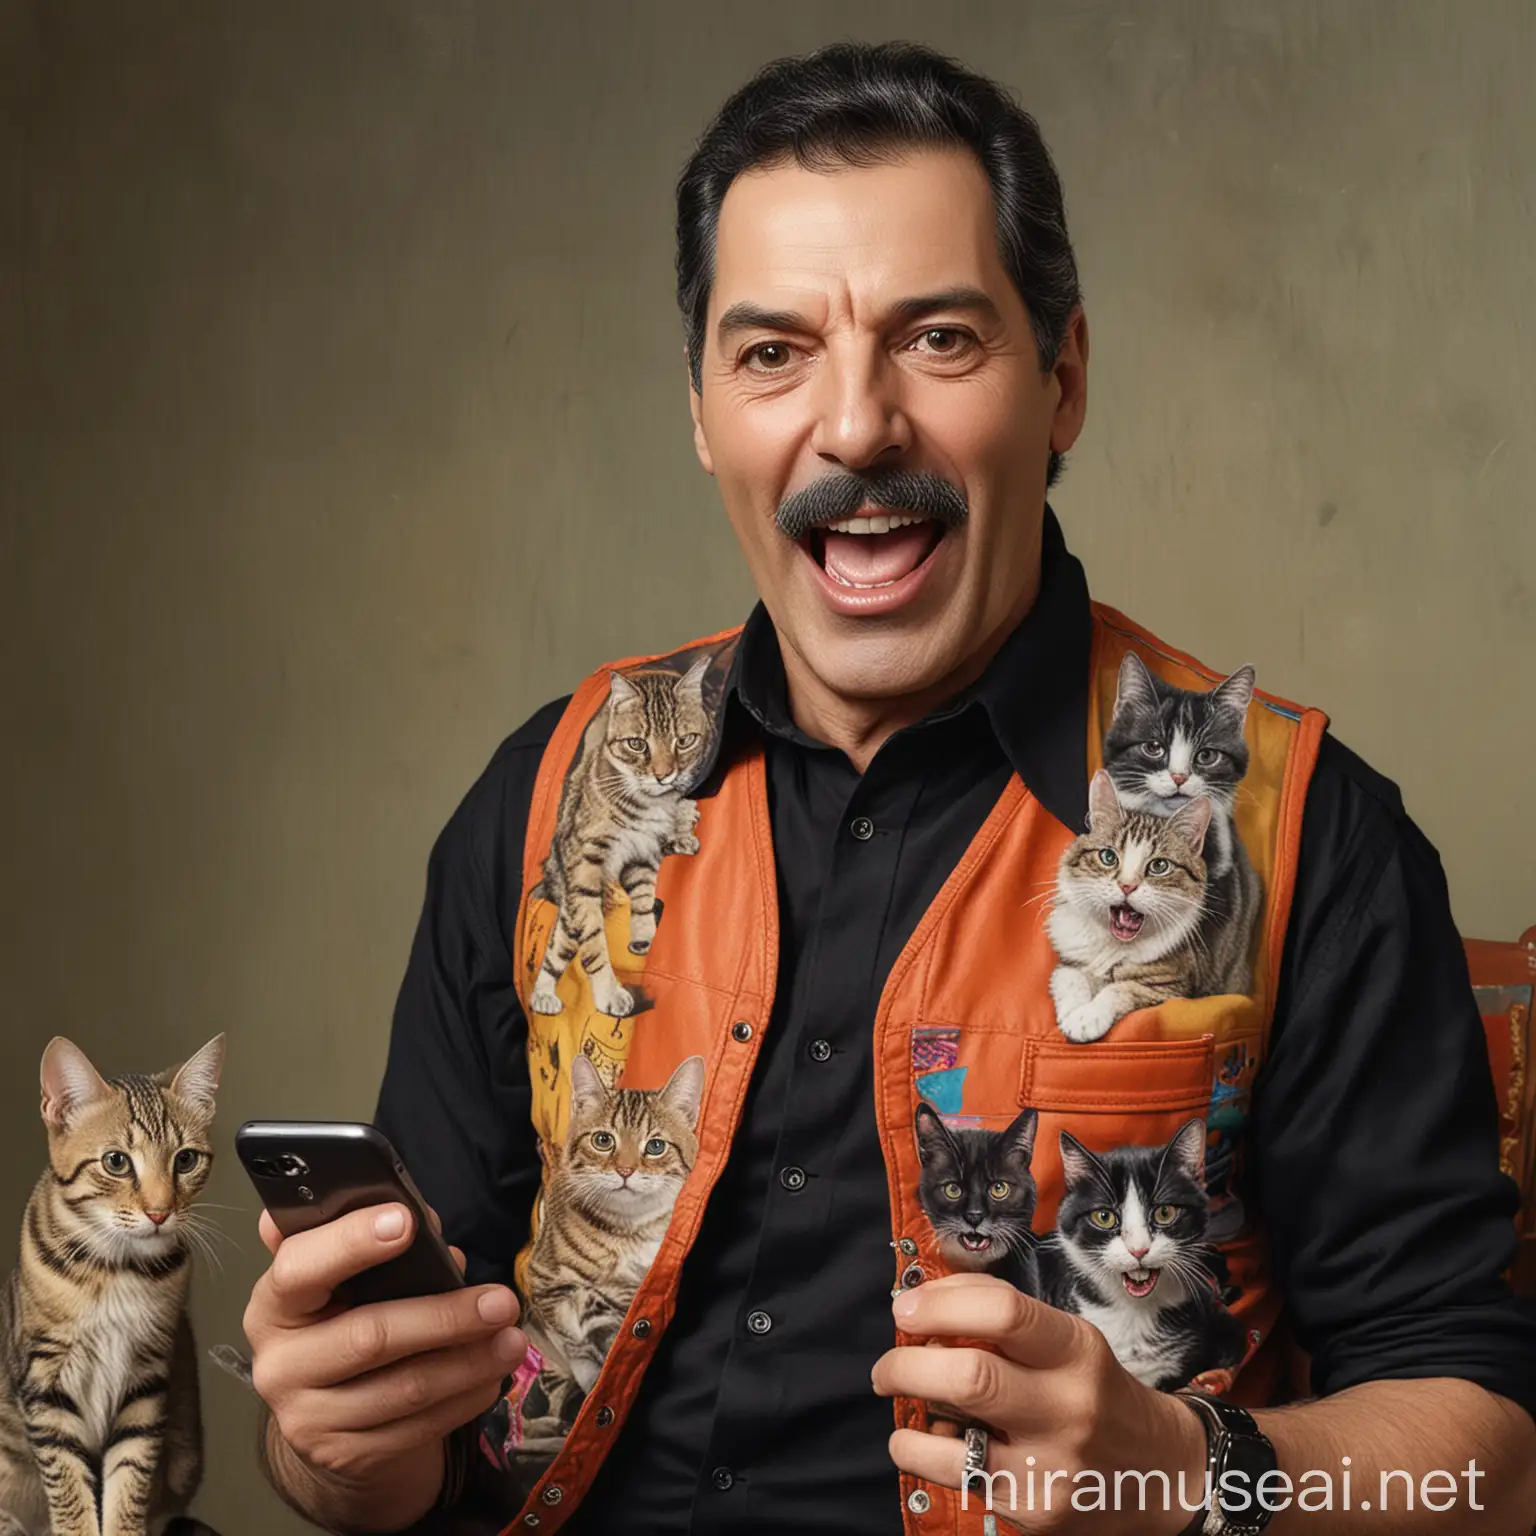 A hyper-realistic photo of a 60-year old Freddie Mercury wearing a black shirt and a coloured gilet with cats painted on it; he's watching a smartphone and laughing